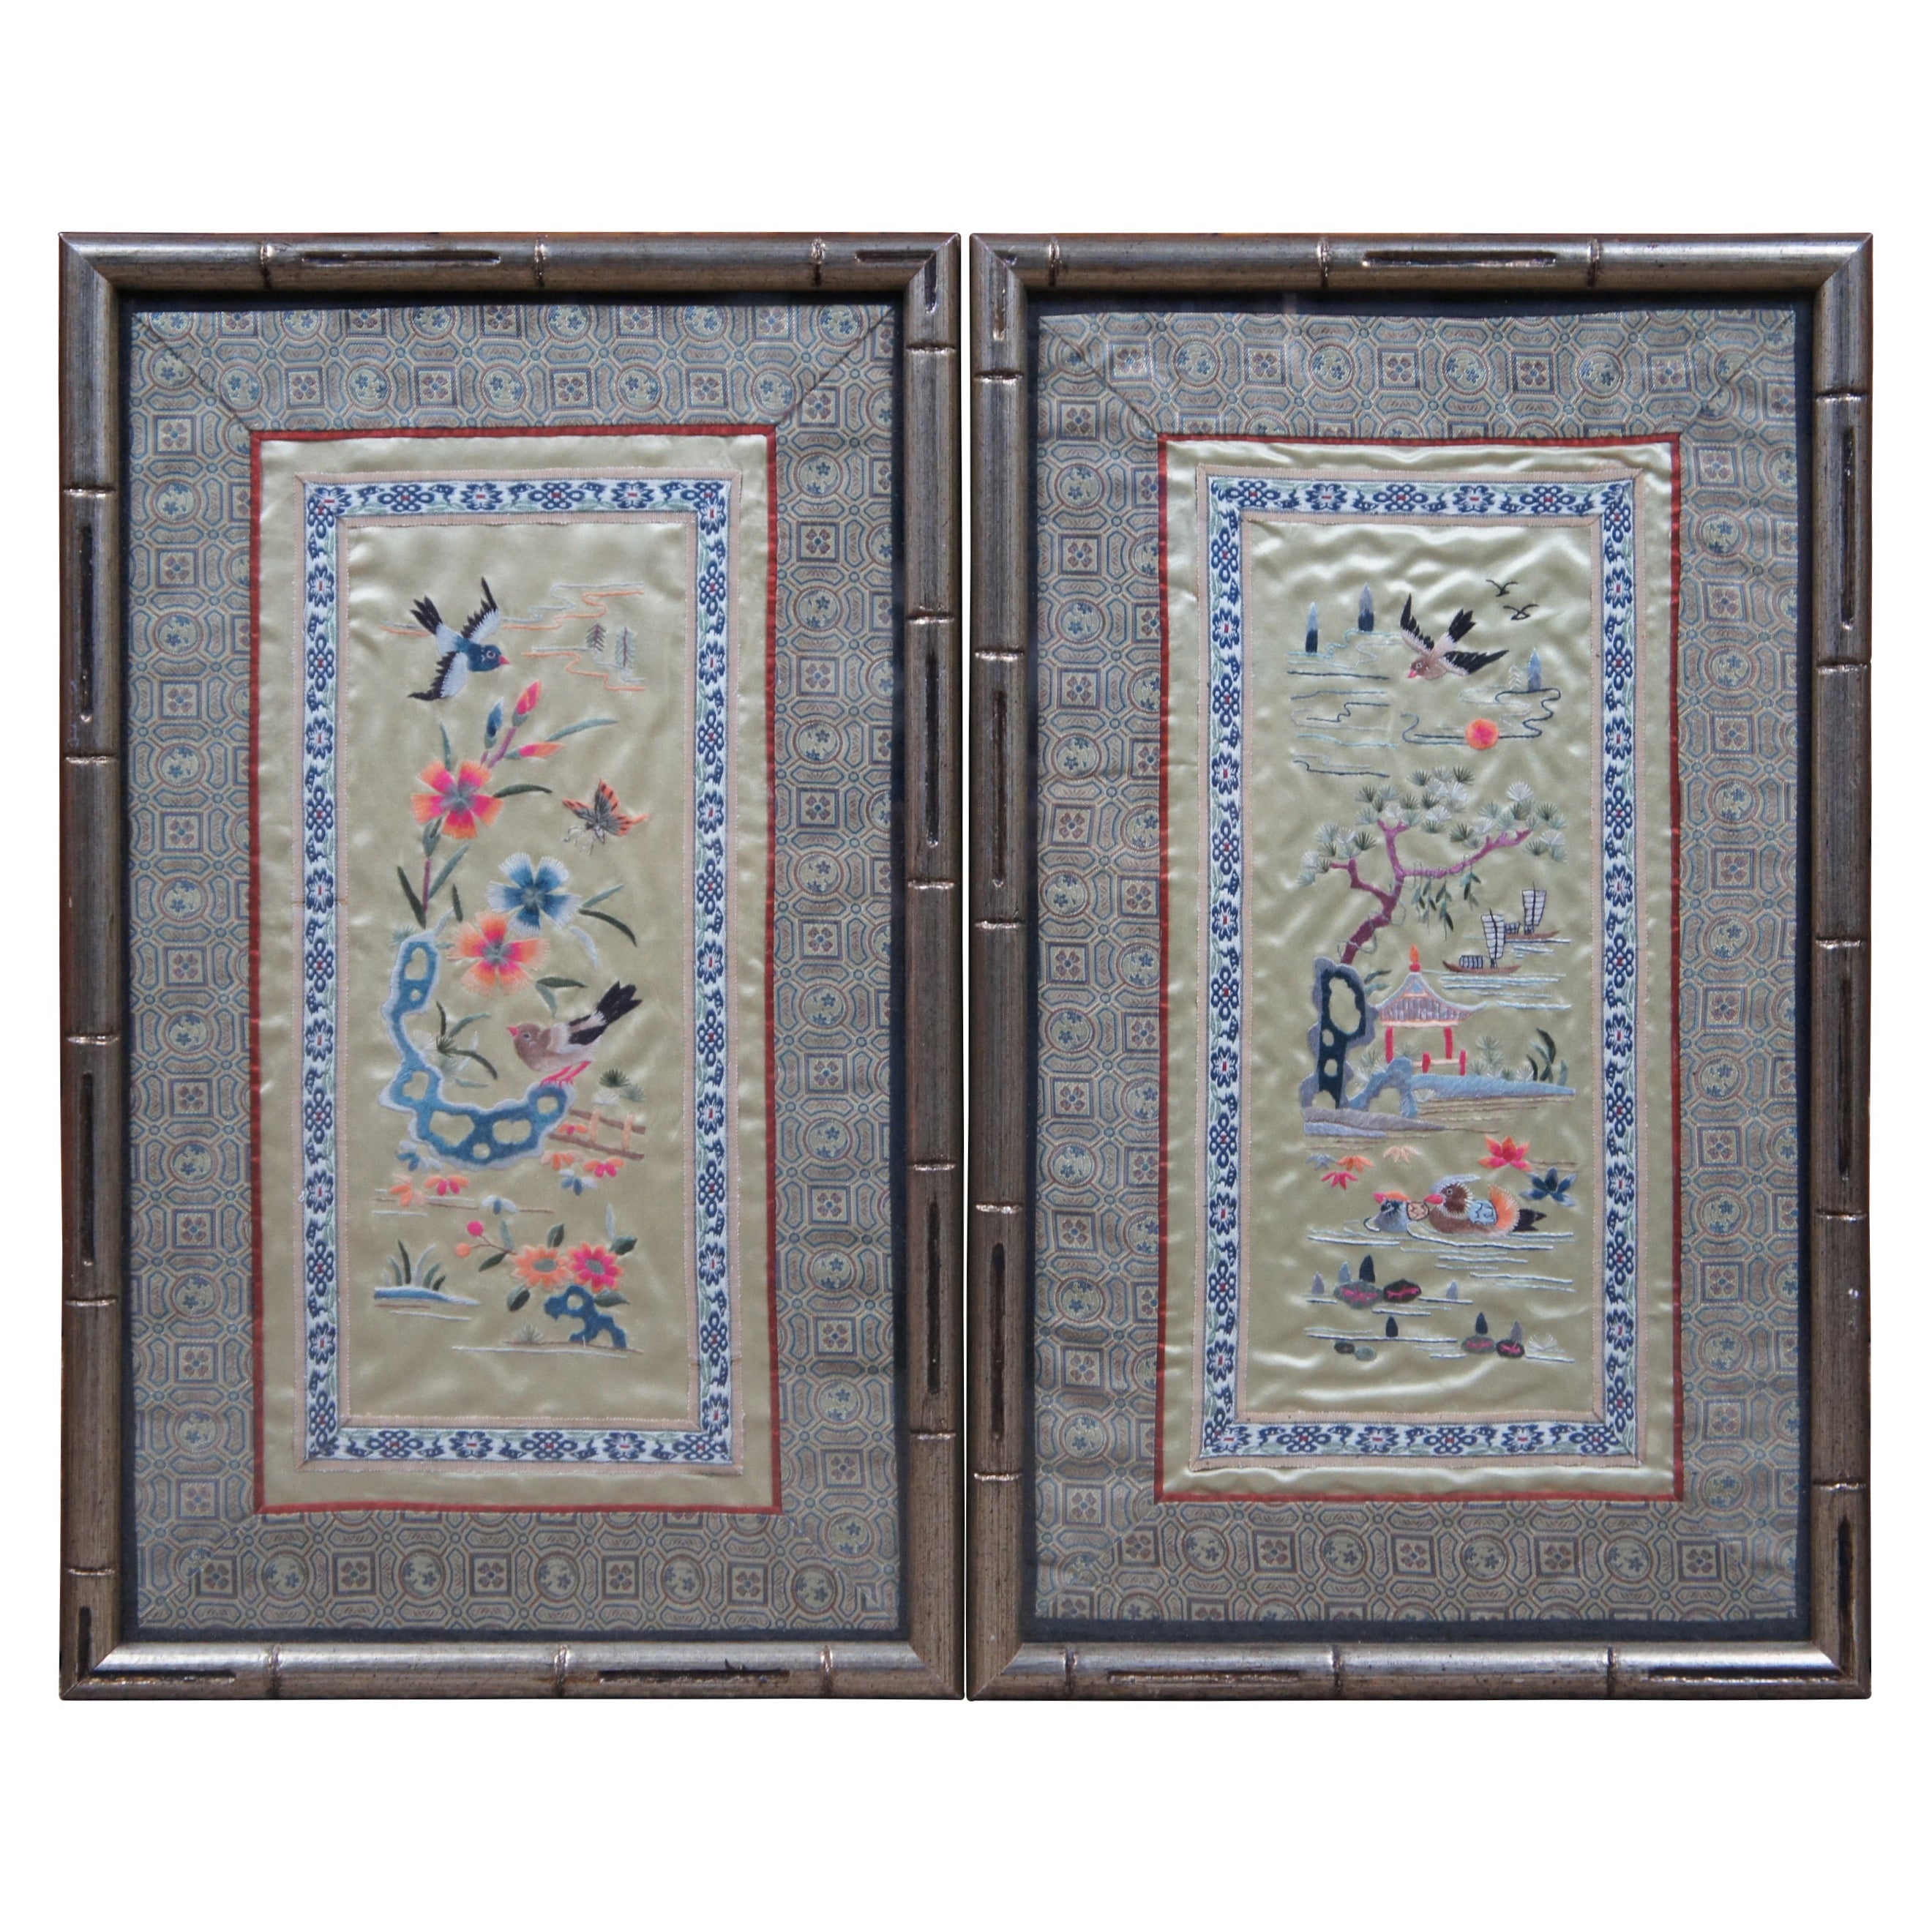 2 Gold Silk Embroidered Chinese Tapestry Landscapes Birds Flowers Framed Pair